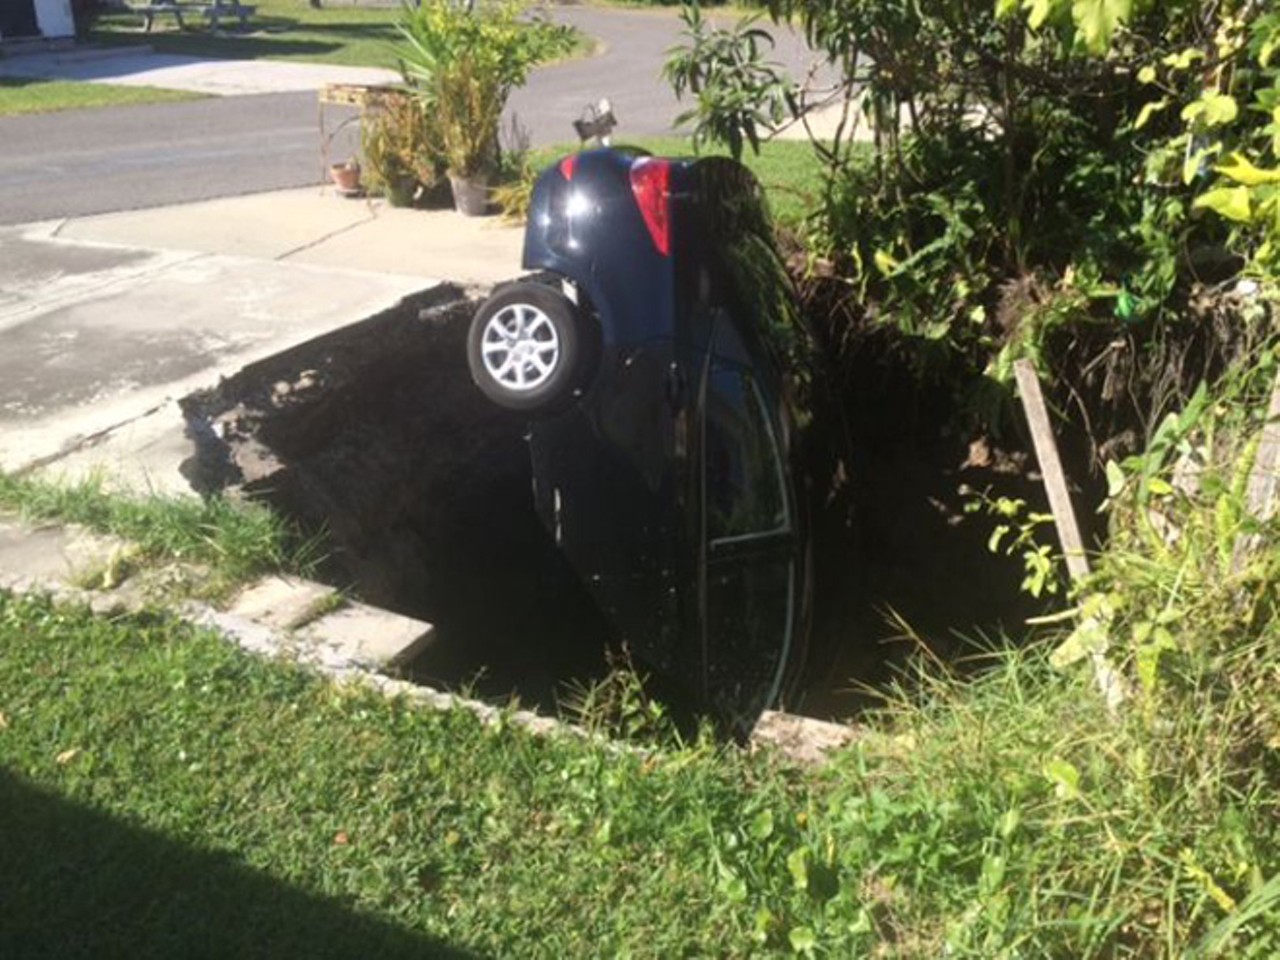 Sinkhole swallows car in Holiday, Fla.
November 11, 2014
A woman's Hyundai Accent took a trip down Sinkhole Lane when a 10-footer opened up next to her trailer home. She saw the tires sinking into the pavement slightly, then proceeded to grab as much as she could before hauling ass from the scene. She was evacuated from her trailer and the car was retrieved from the hole five days later.
Photo via wtsp.com